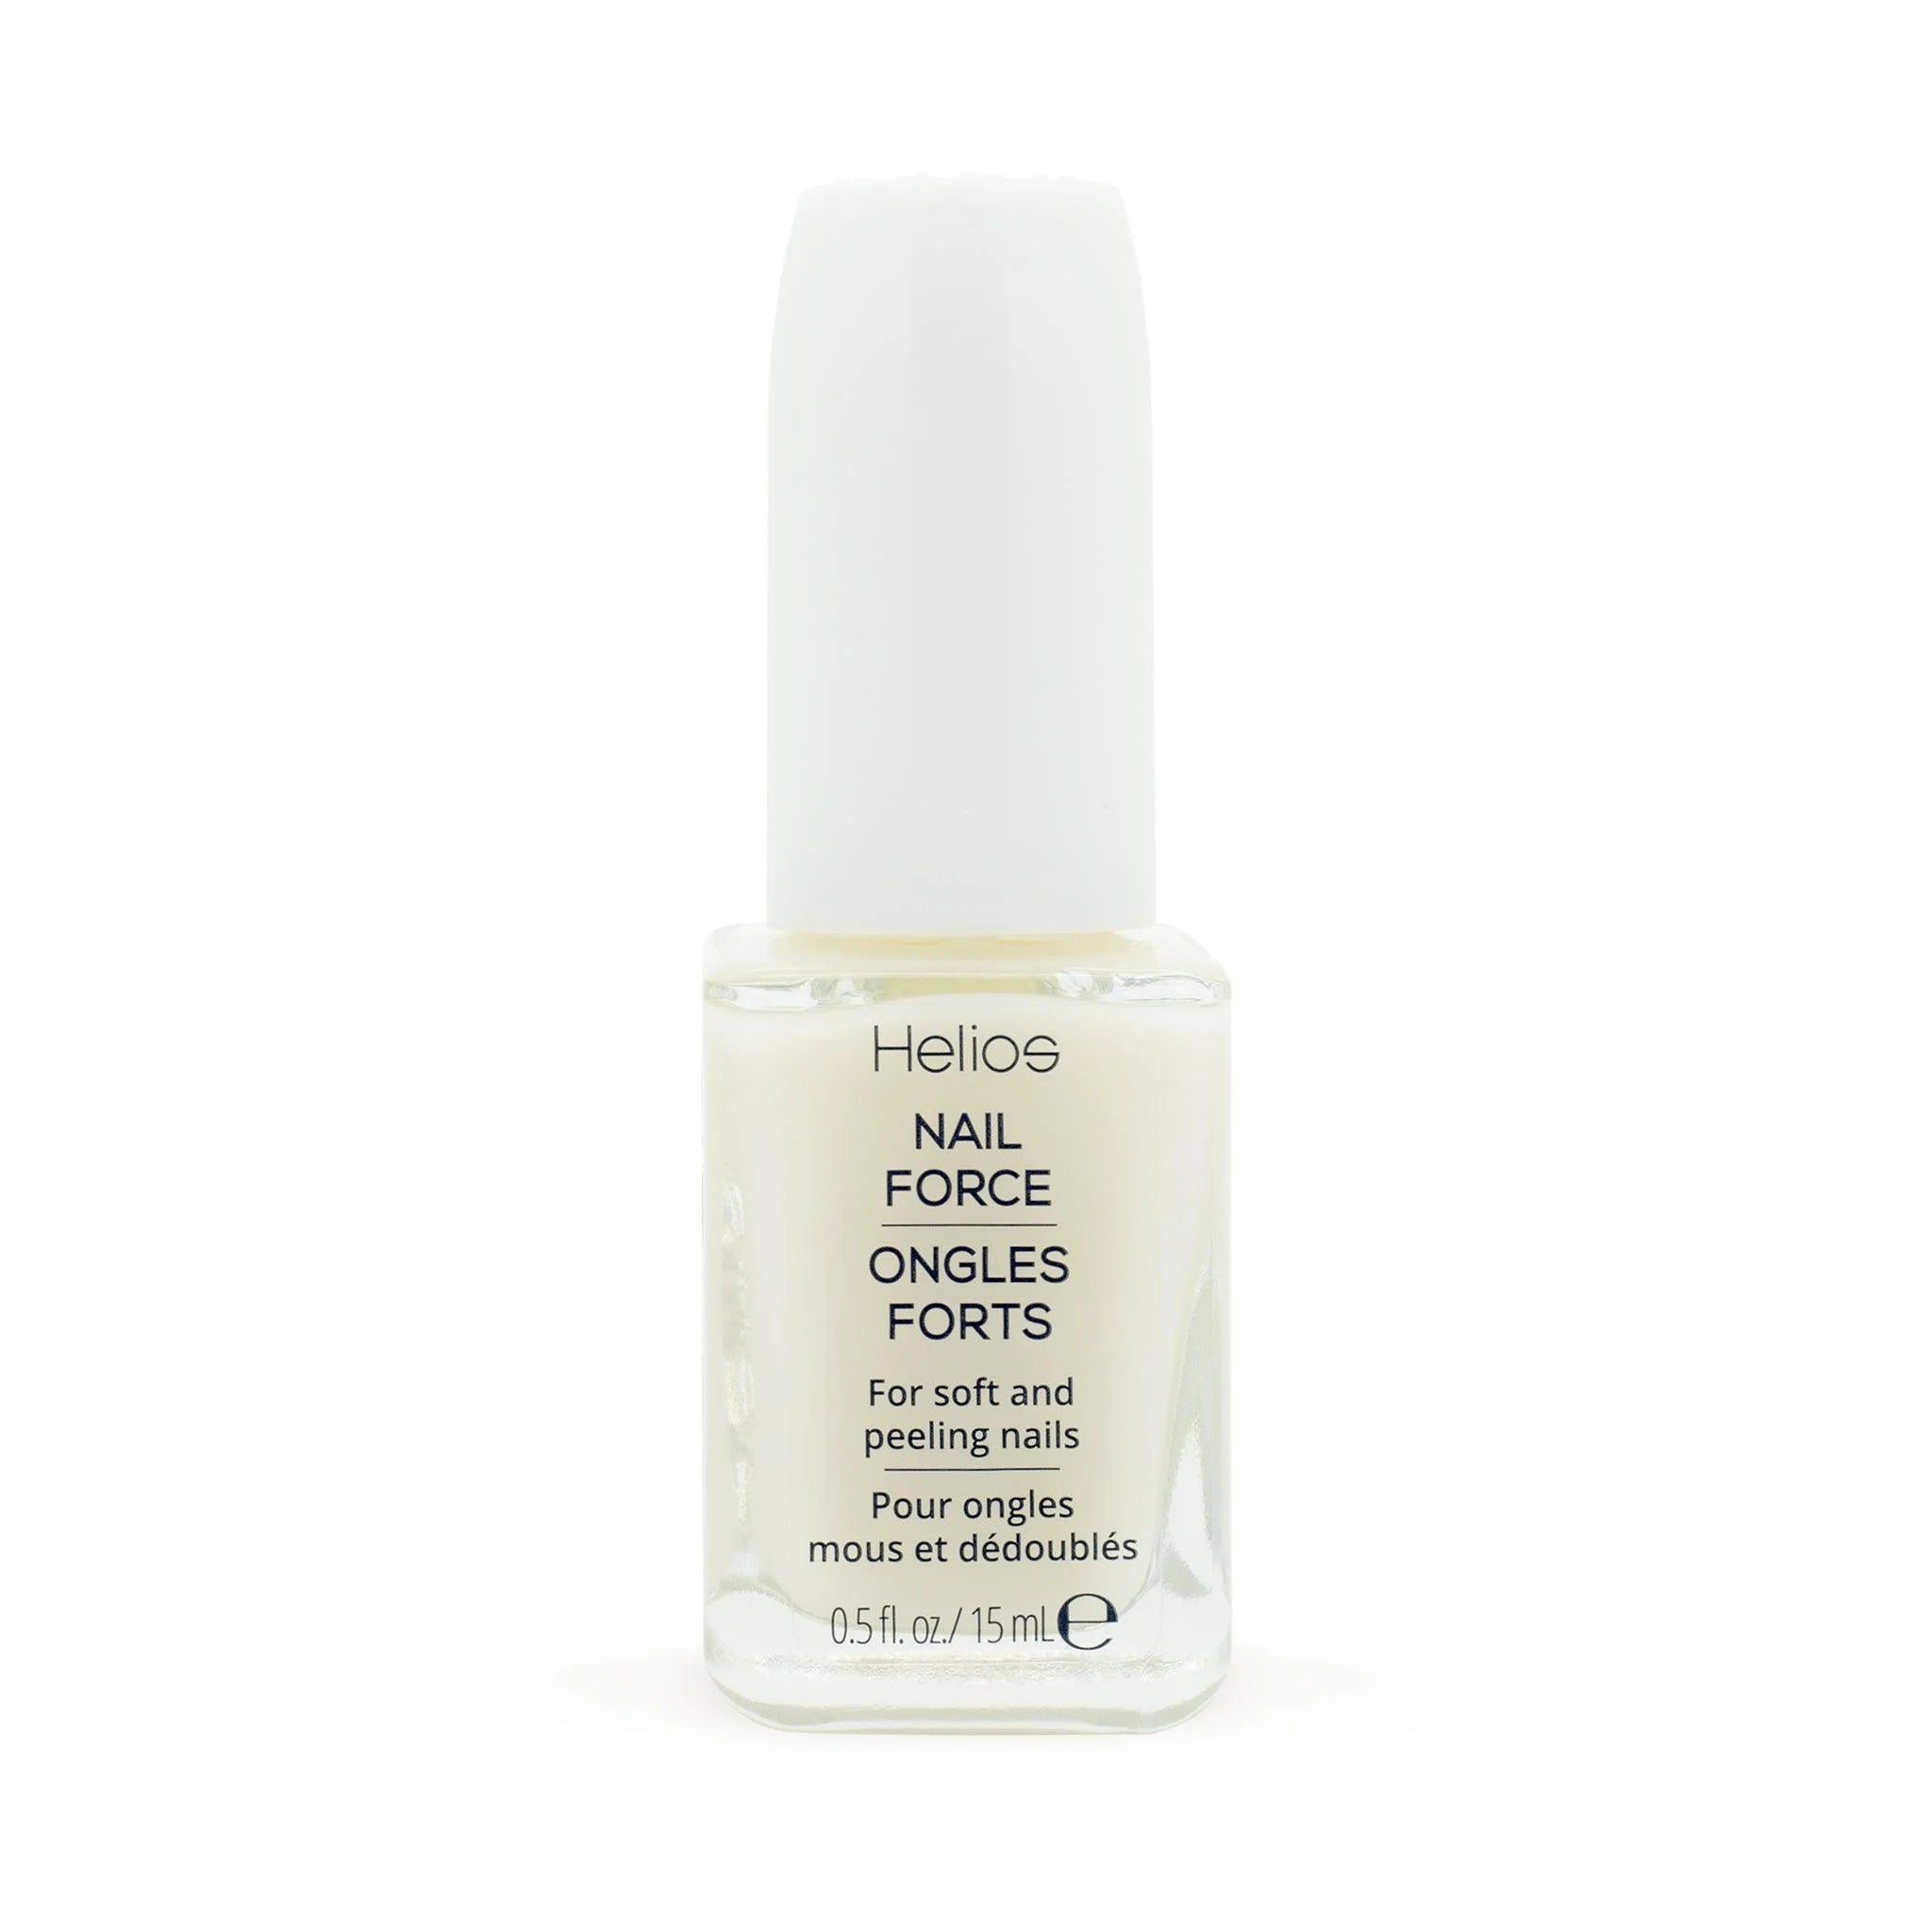 Helios - Nail Force - Creata Beauty - Professional Beauty Products